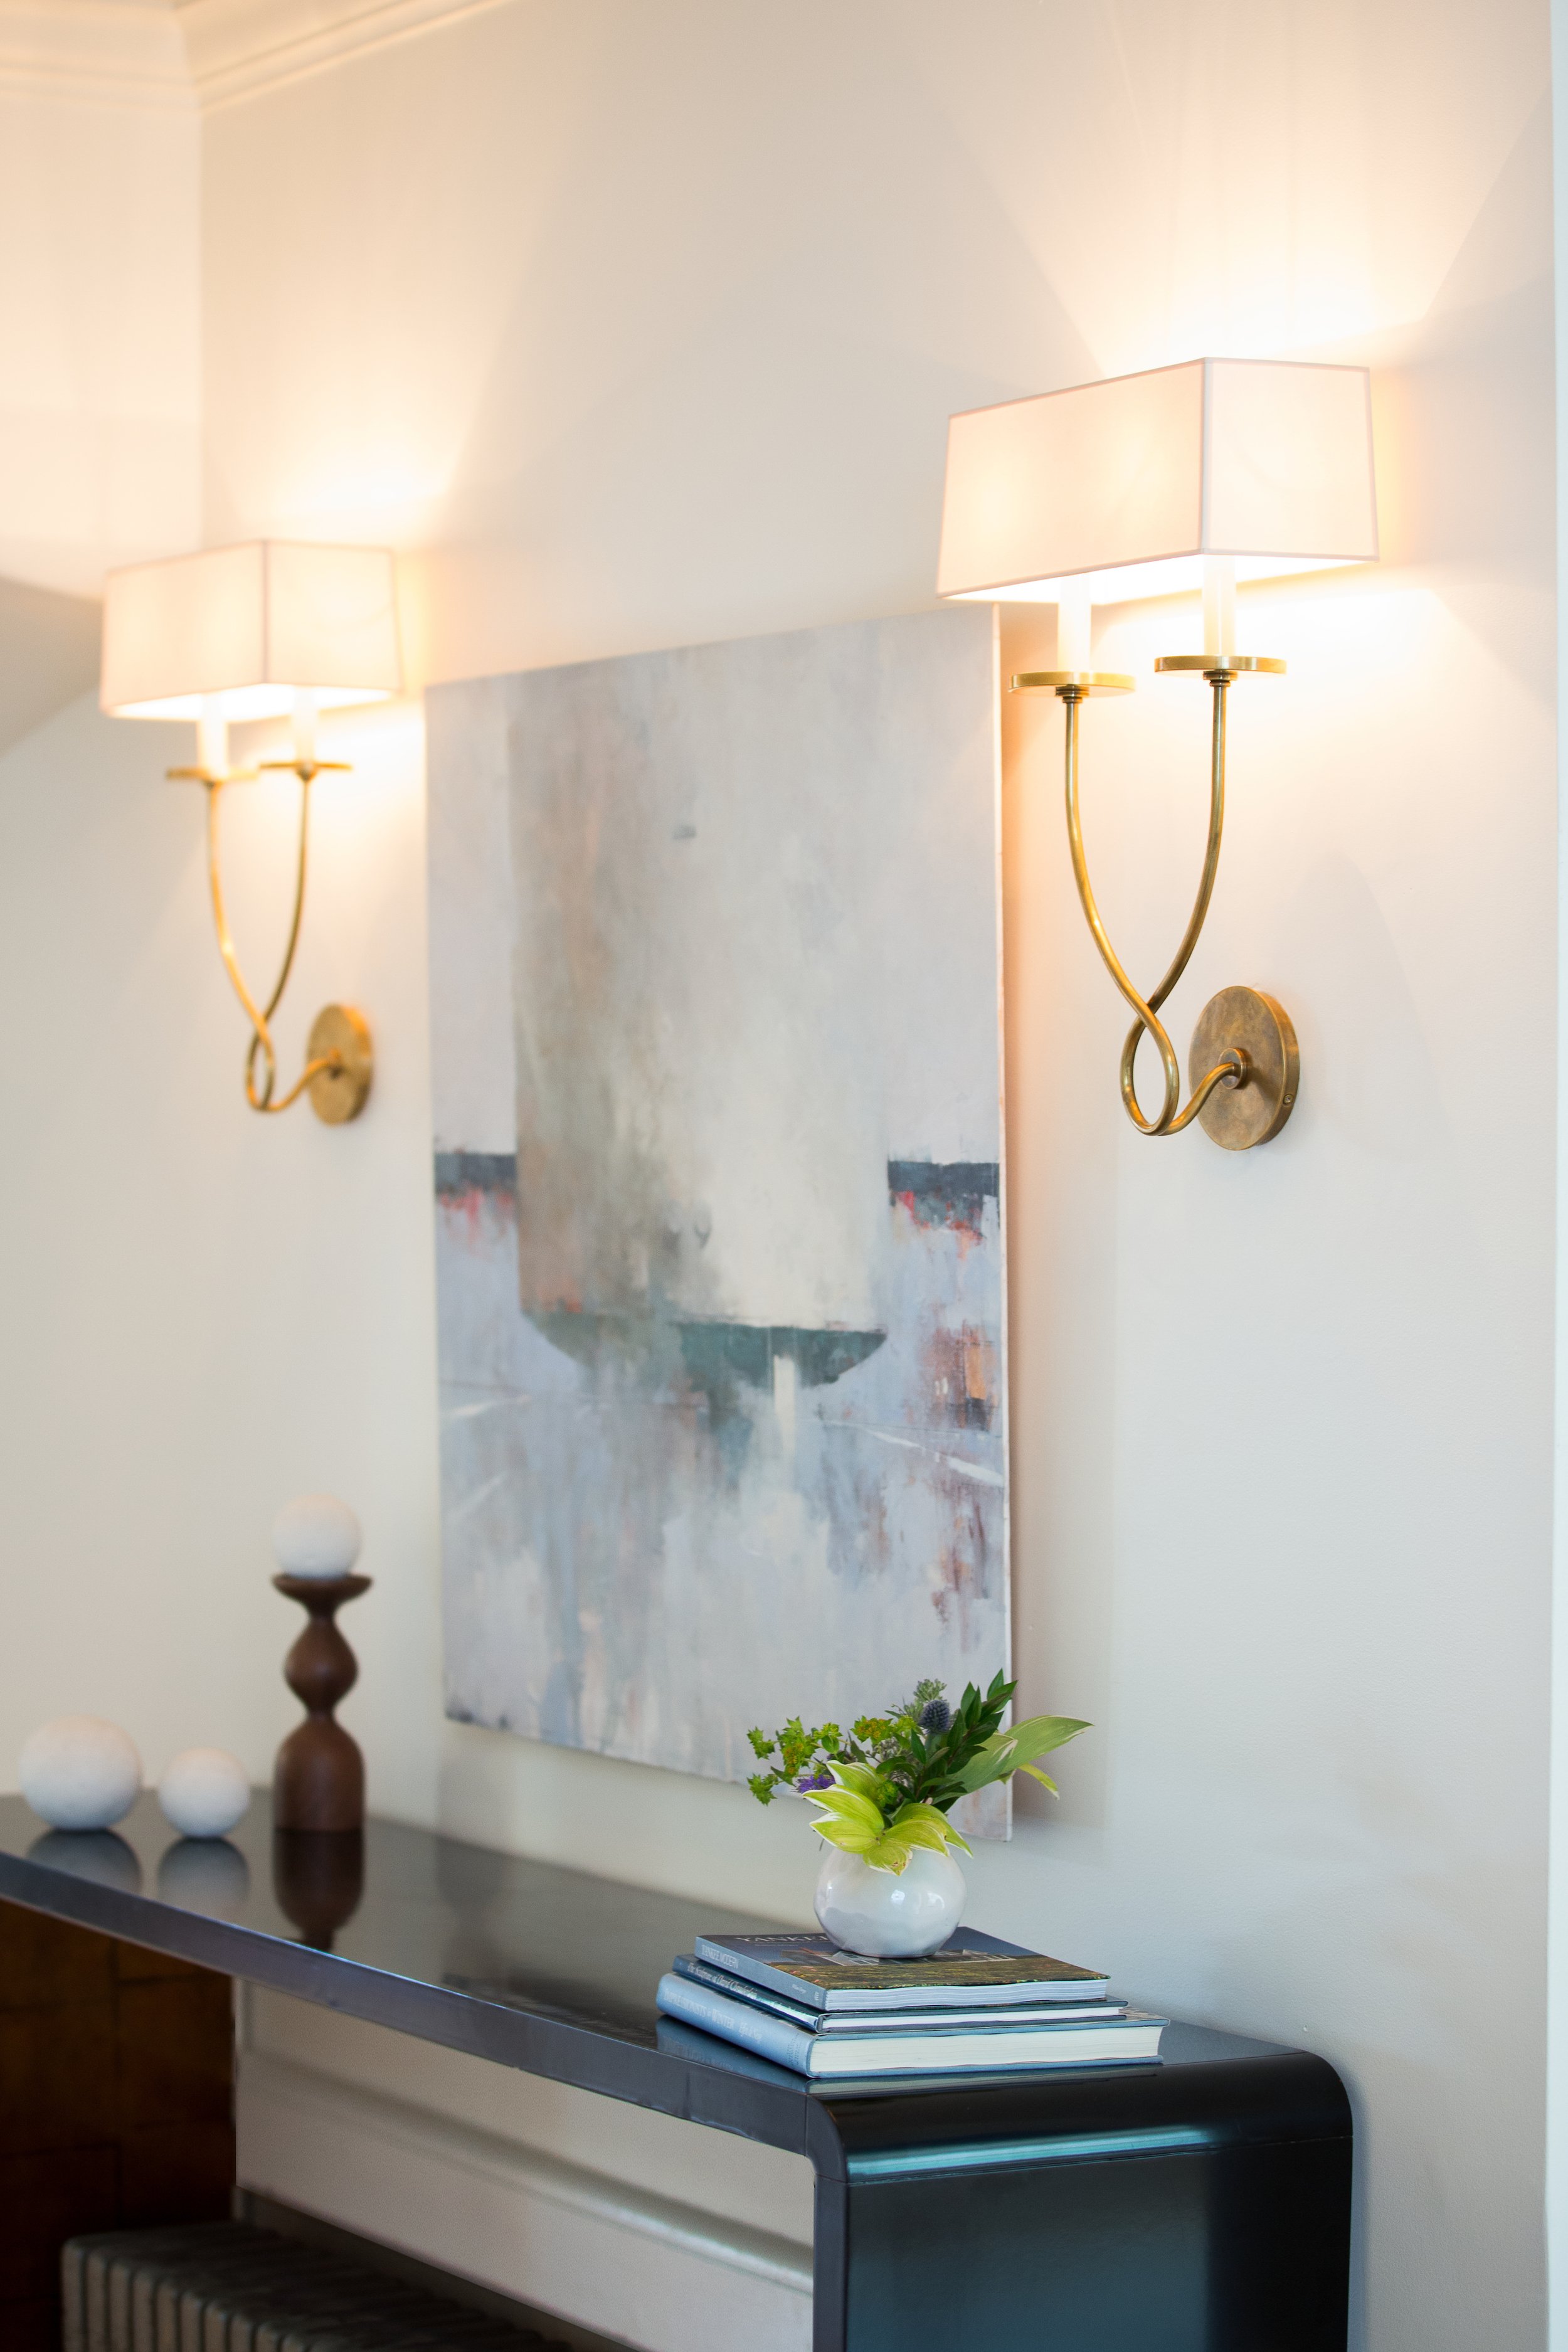 04-img-modern-console-table-brass-sconces.jpg